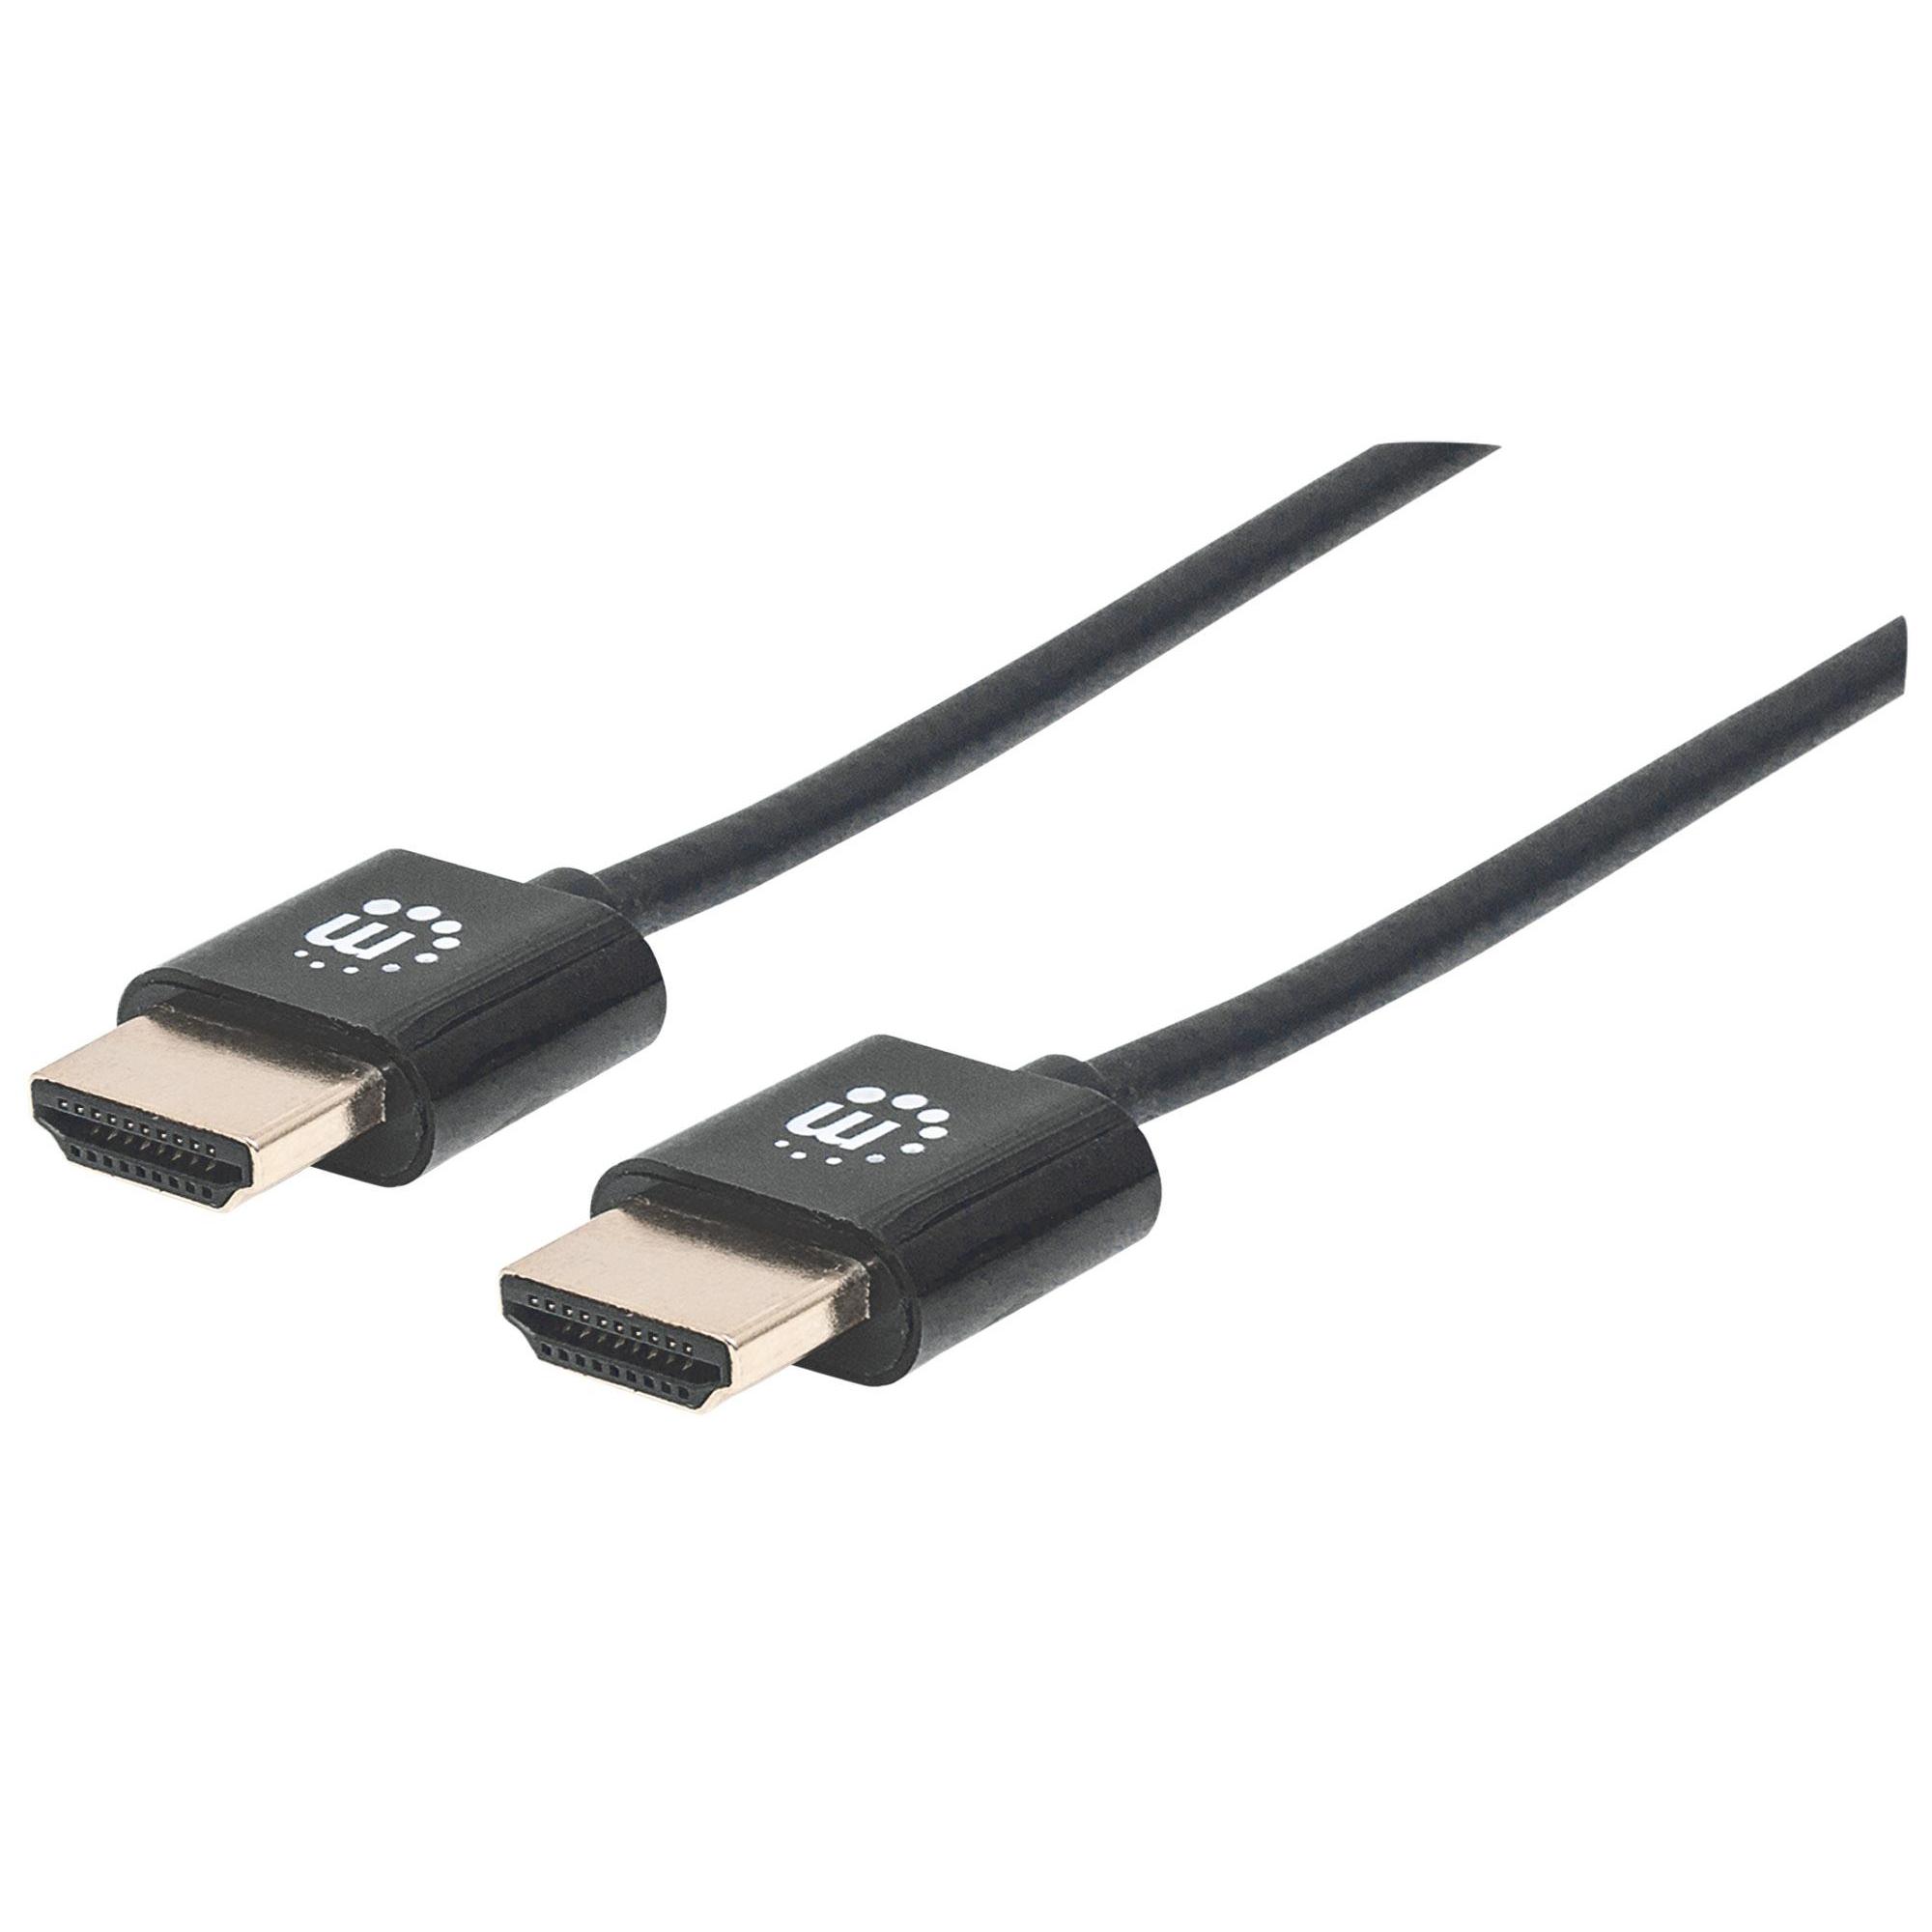 Cavo HDMI High Speed con Ethernet Ultra Sottile 1m